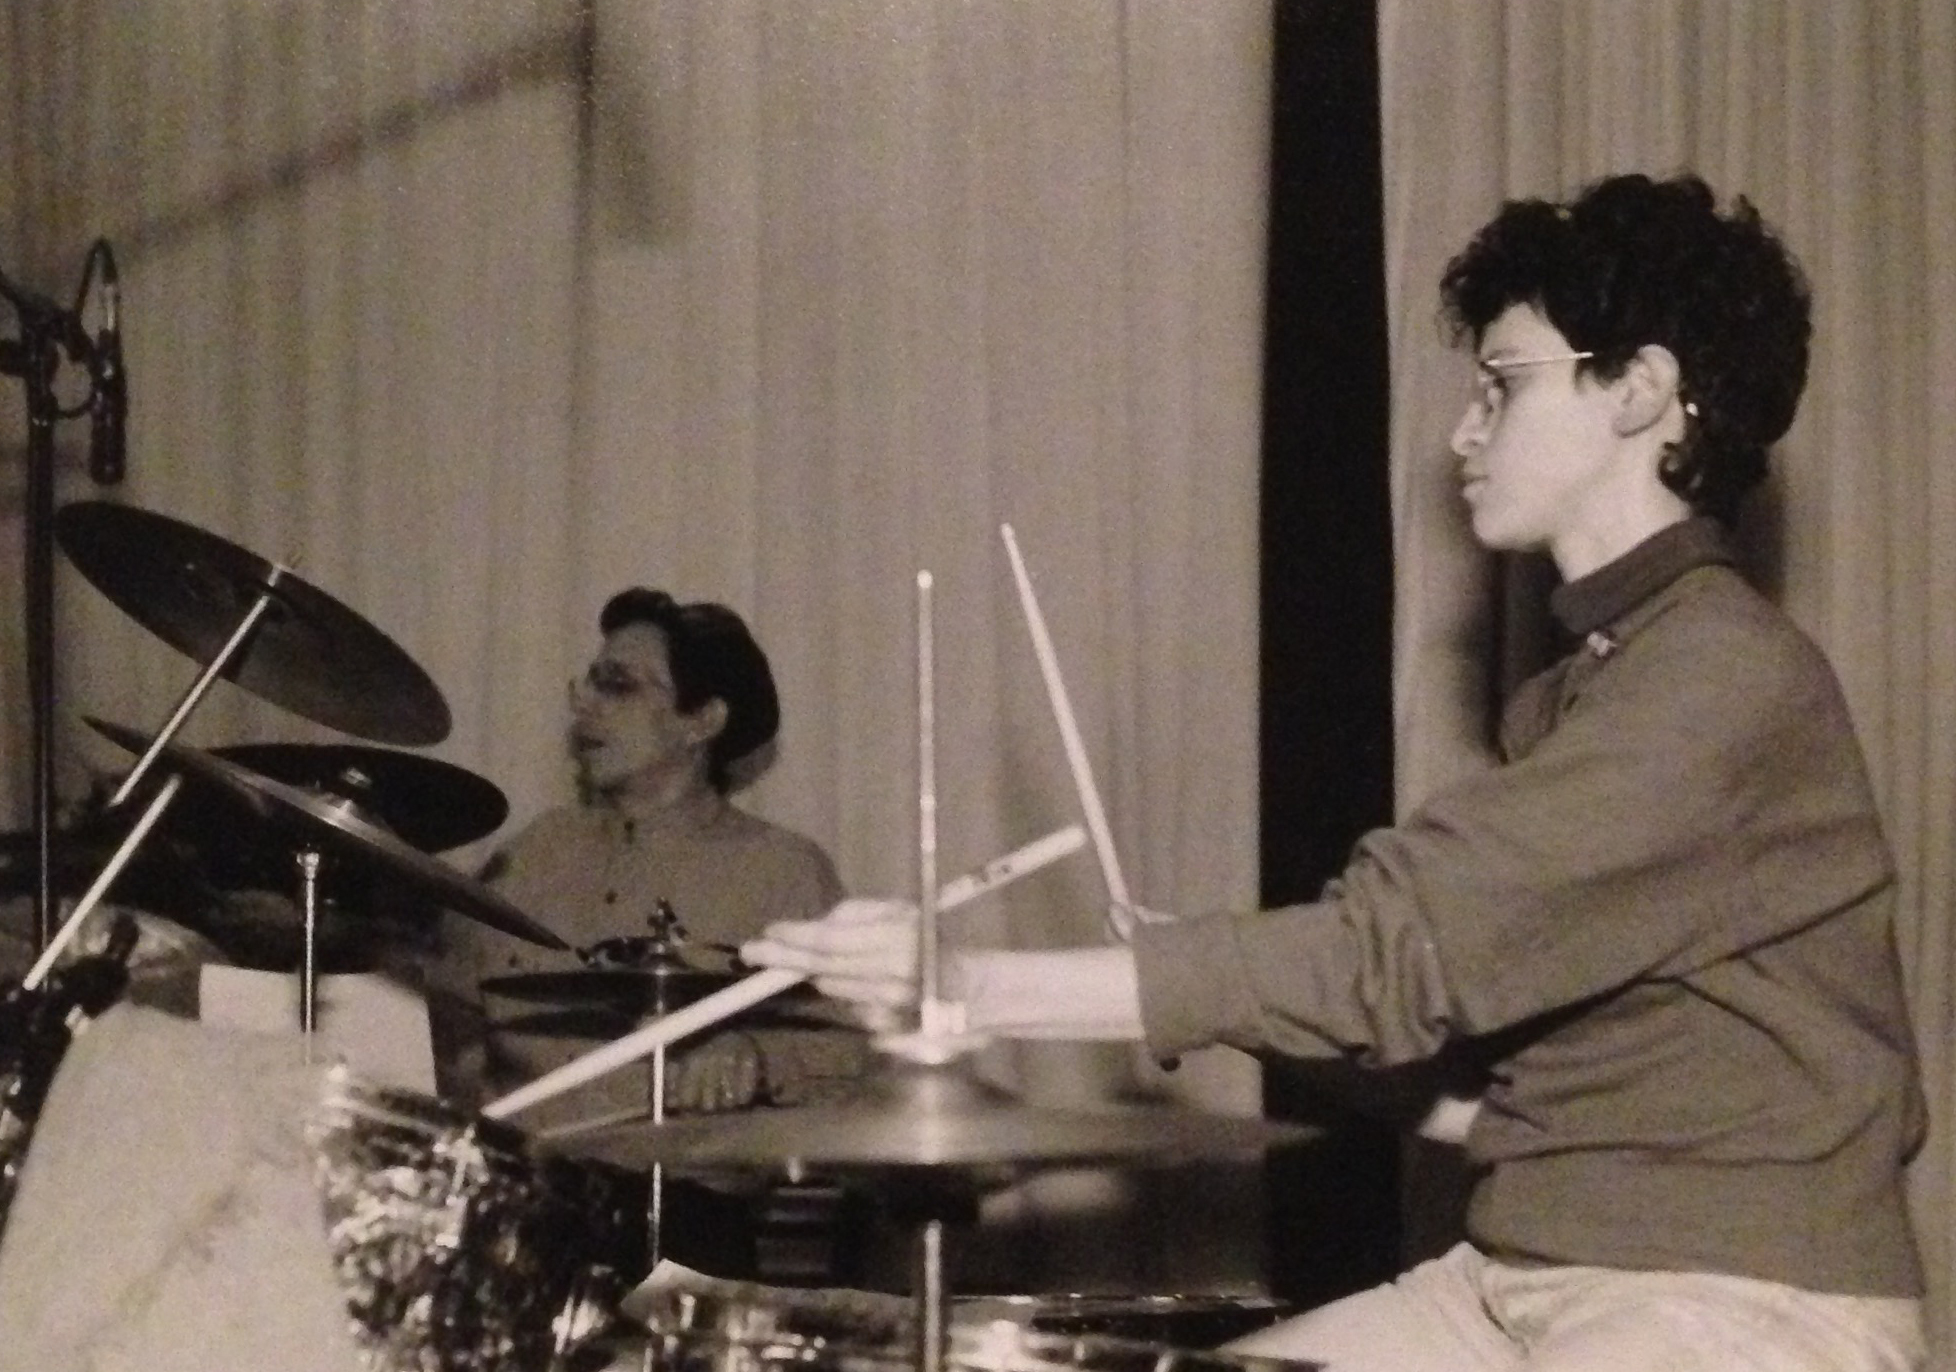 Eve Sicular playing drums with David Licht. (Photo by Albert J. Winn)